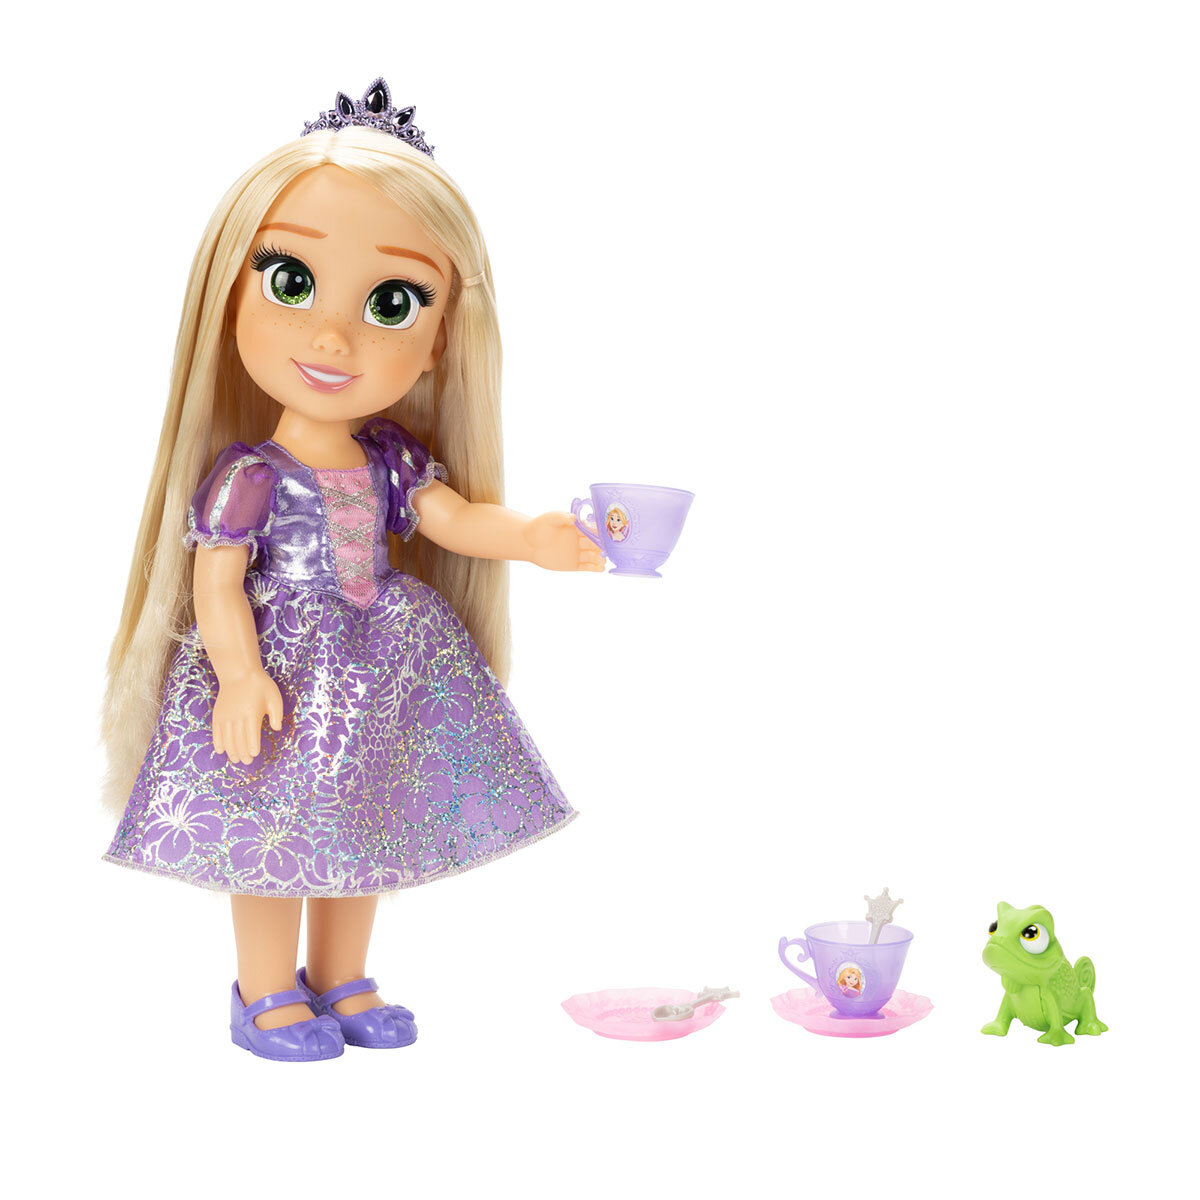 Buy Disney Tea Time Party Doll Rapunzel & Pascal Overview Image at Costco.co.uk